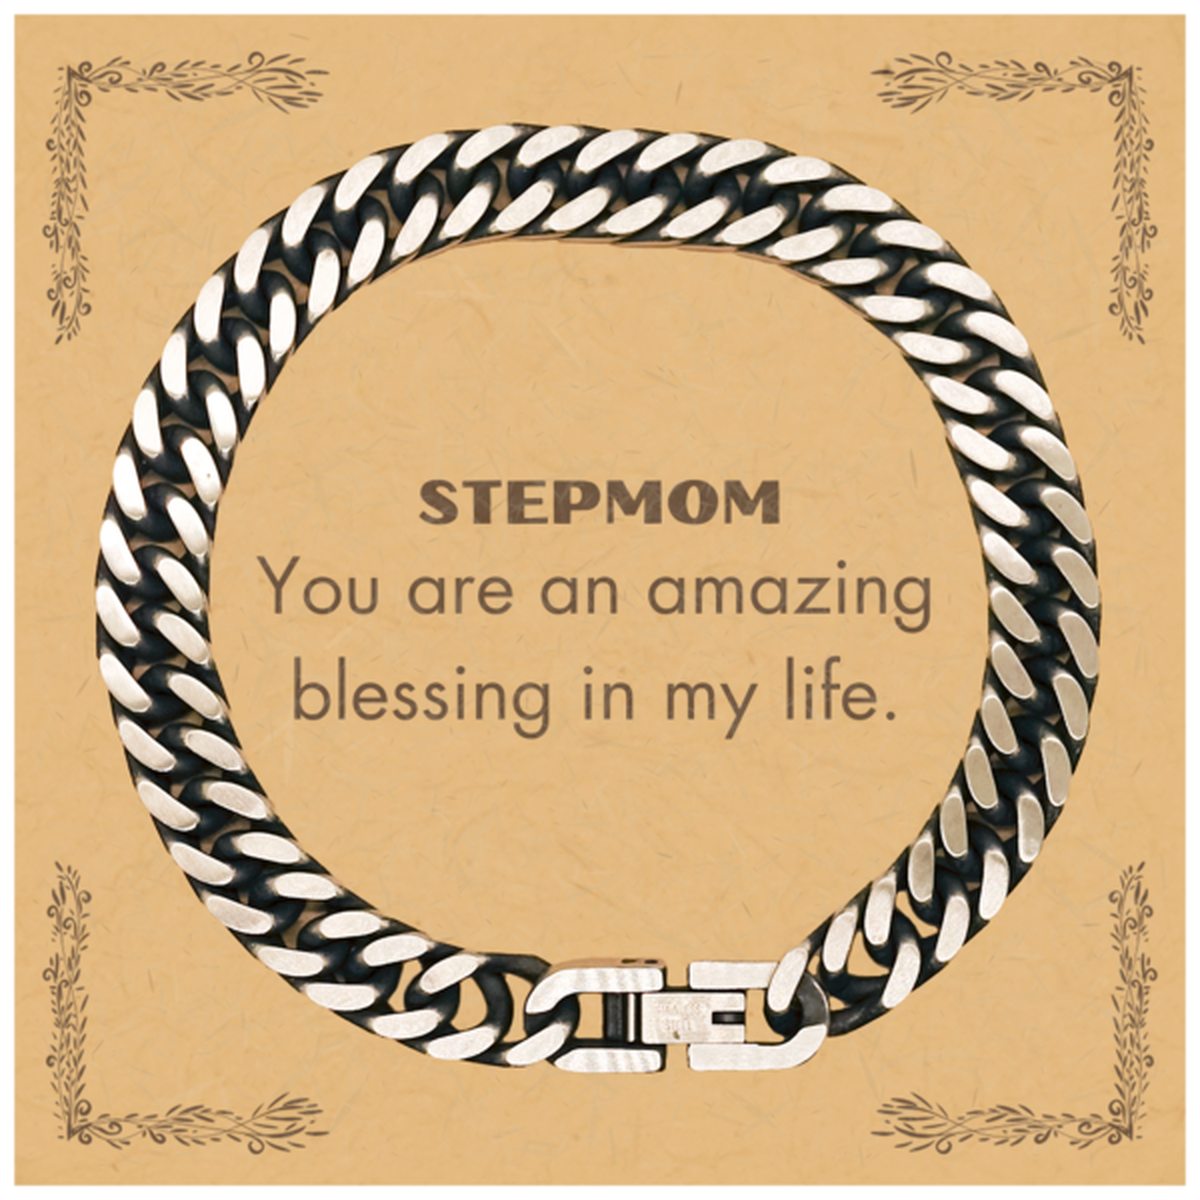 Stepmom Cuban Link Chain Bracelet, You are an amazing blessing in my life, Thank You Gifts For Stepmom, Inspirational Birthday Christmas Unique Gifts For Stepmom